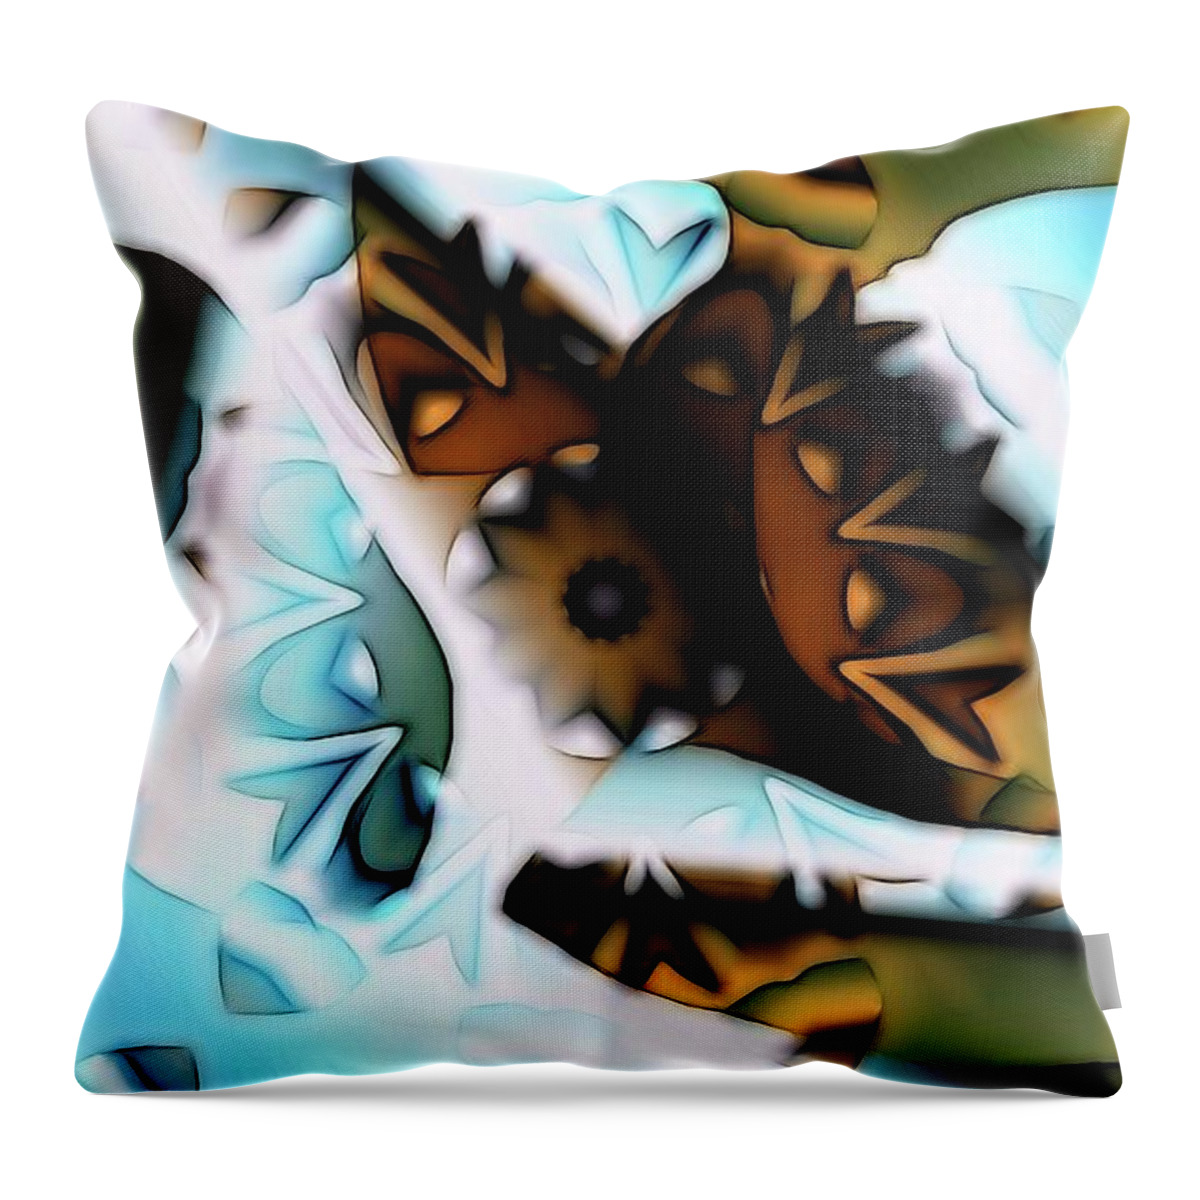 Abstract Throw Pillow featuring the digital art Discontinuous Permafrost by Ron Bissett